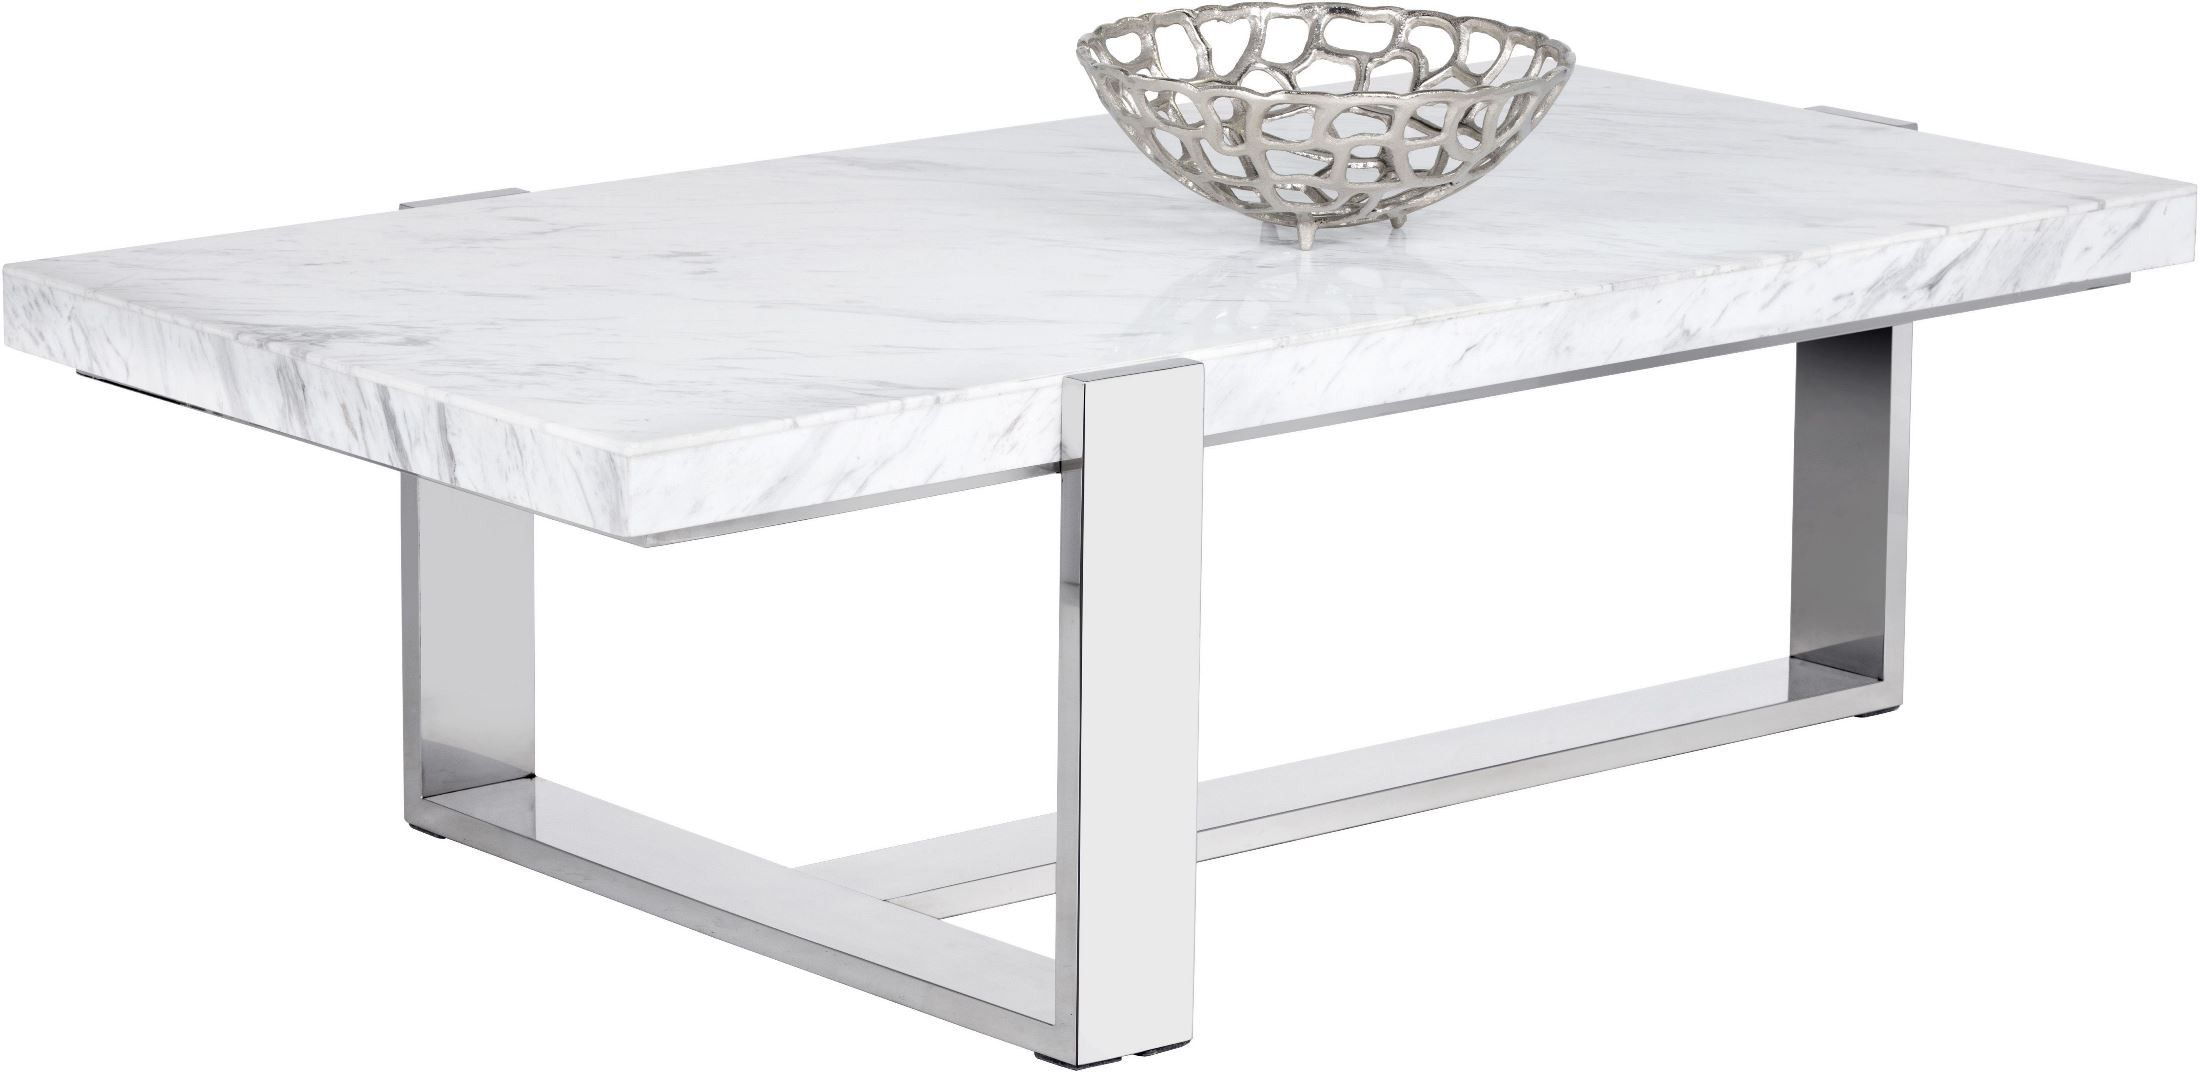 Tribecca White Marble Rectangular Coffee Table, 101294 For Faux White Marble And Metal Coffee Tables (View 13 of 15)